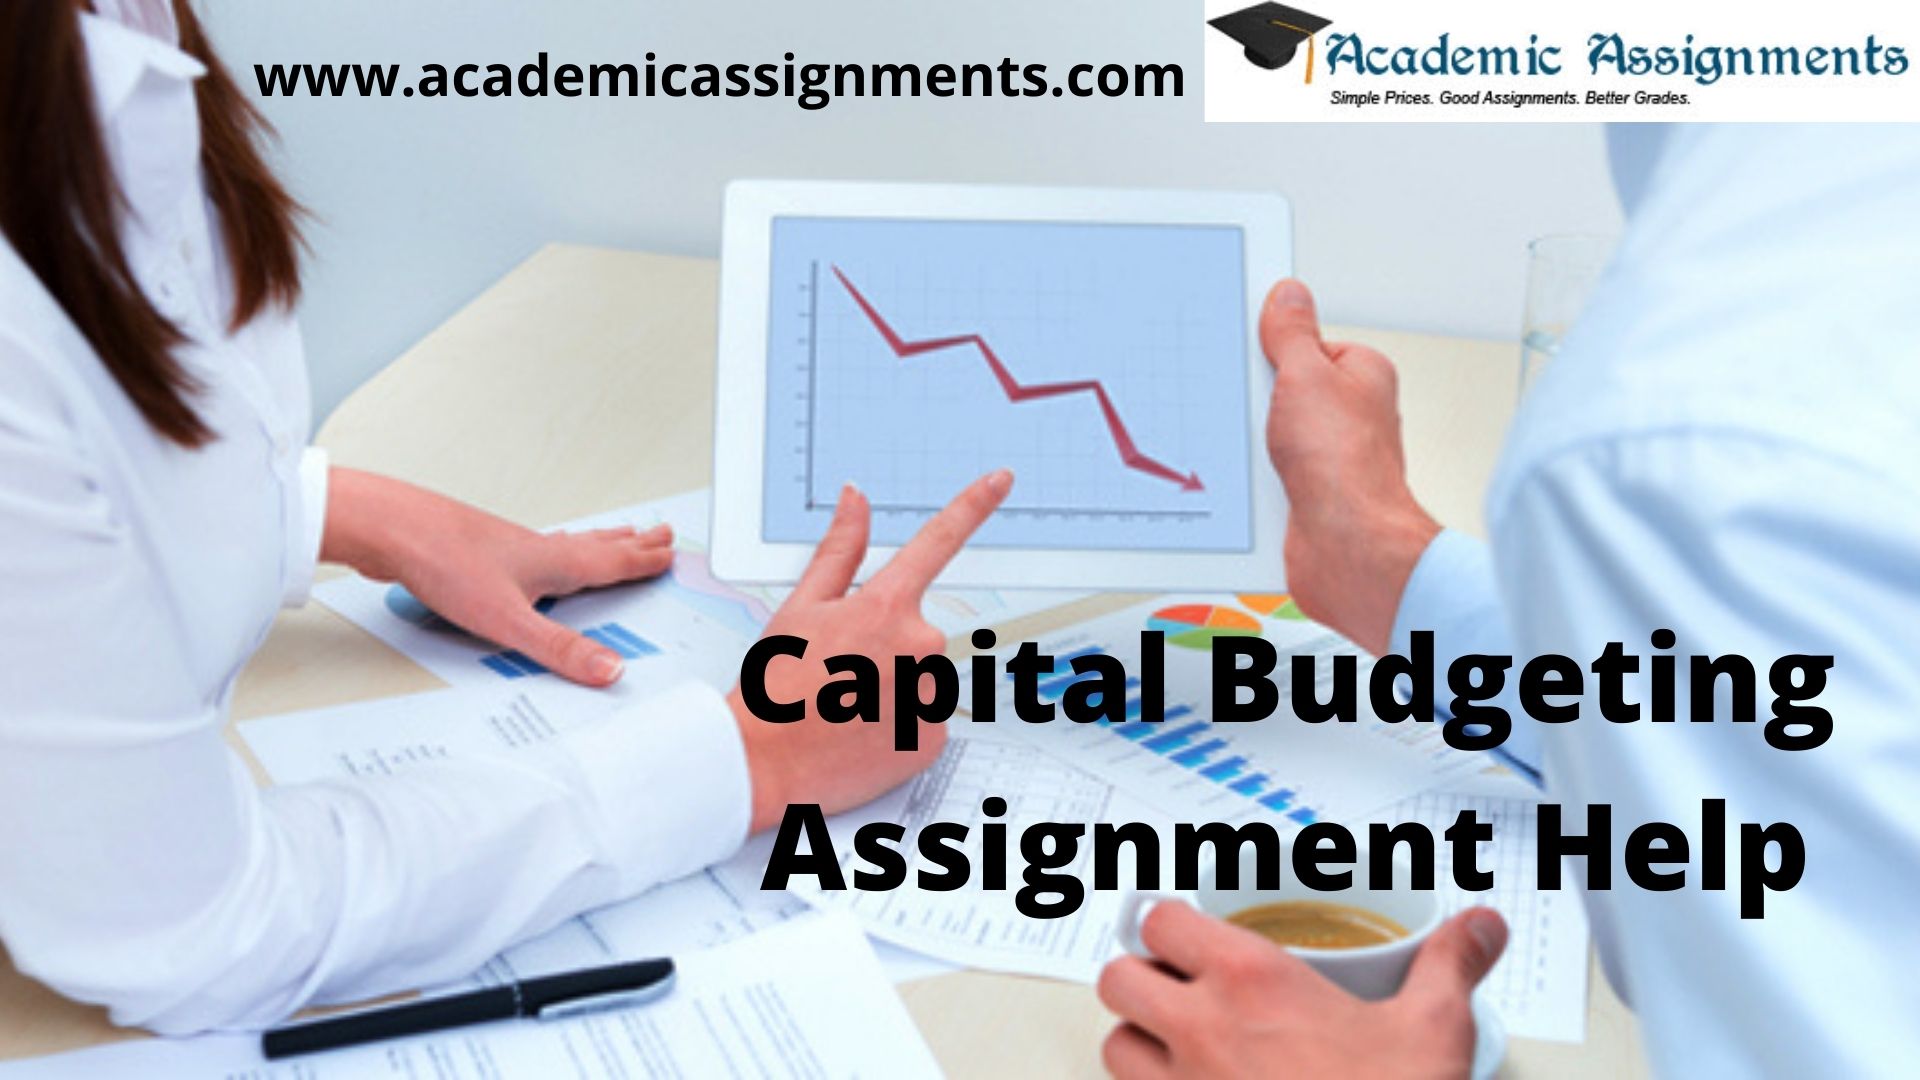 Capital Budgeting Assignment Help